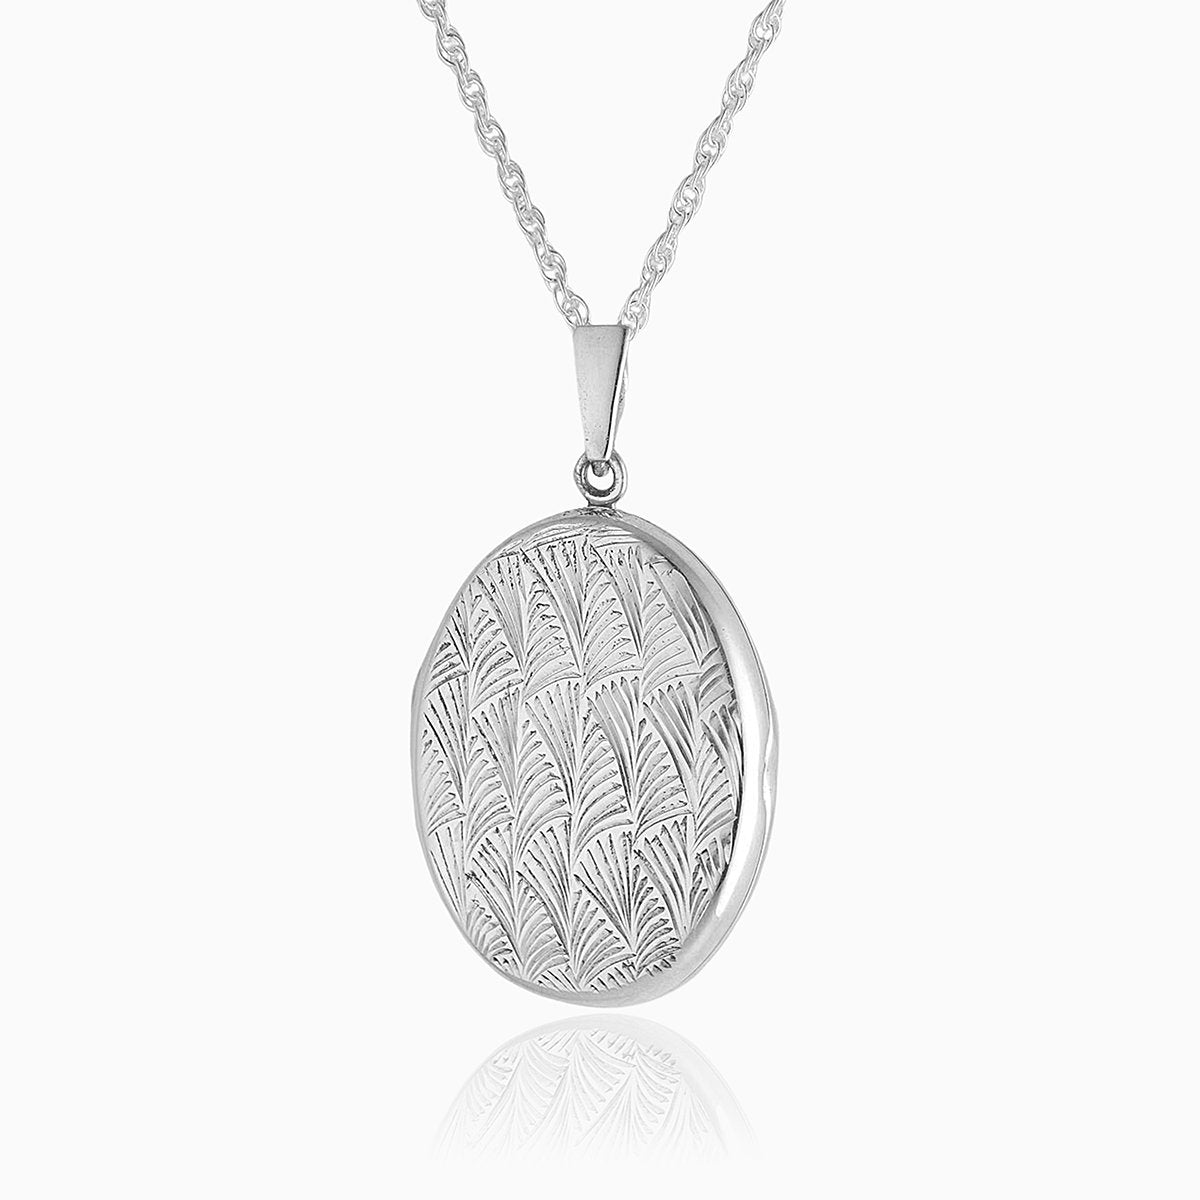 Product title: Art Deco Feather Pattern Locket, product type: Locket